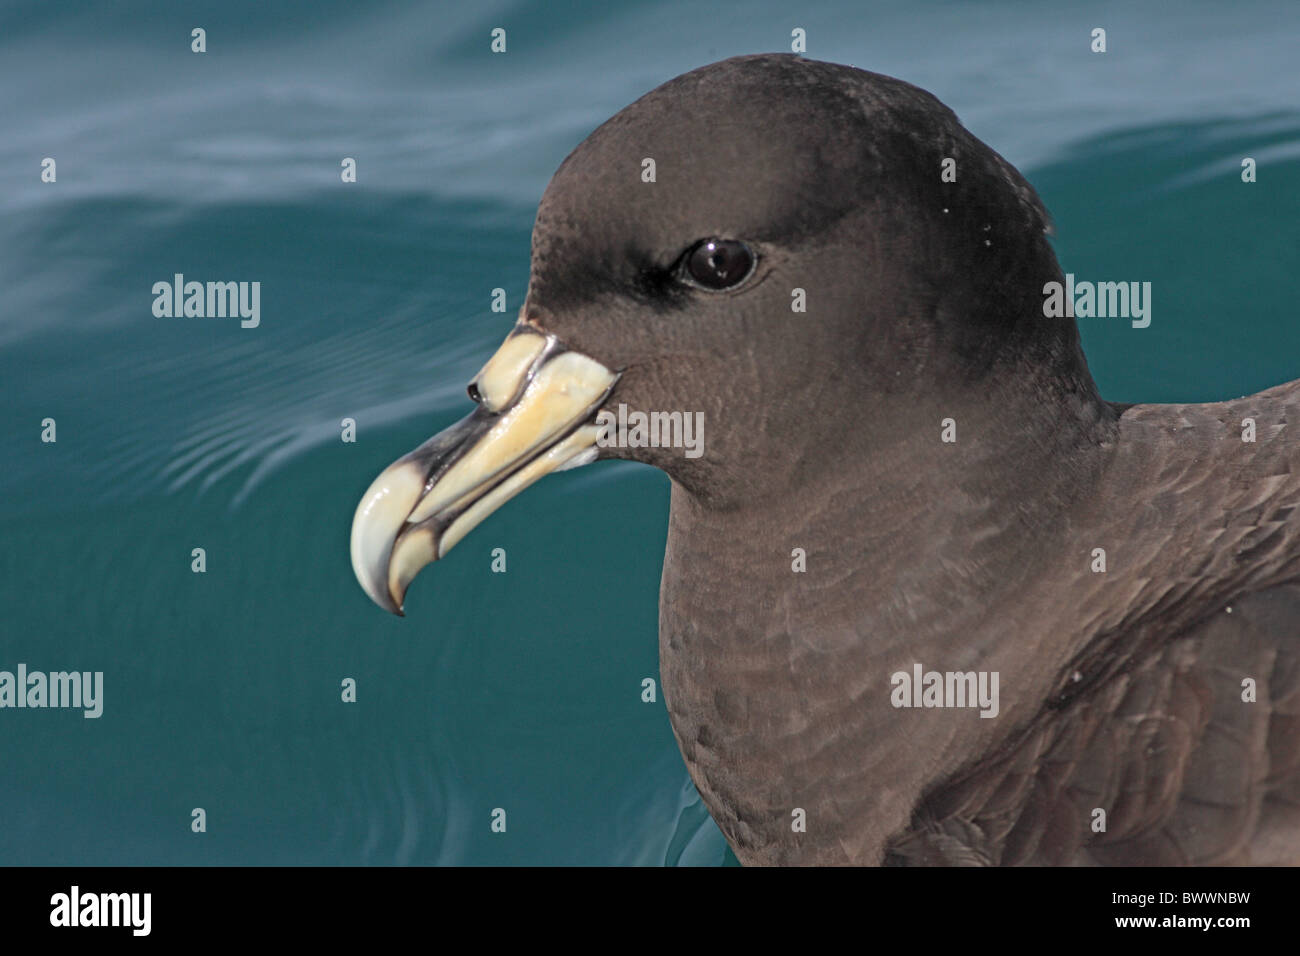 White-chinned Petrel (Procellaria aequinoctialis) adult, close-up of head, swimming at sea, Kaikoura, New Zealand, Stock Photo